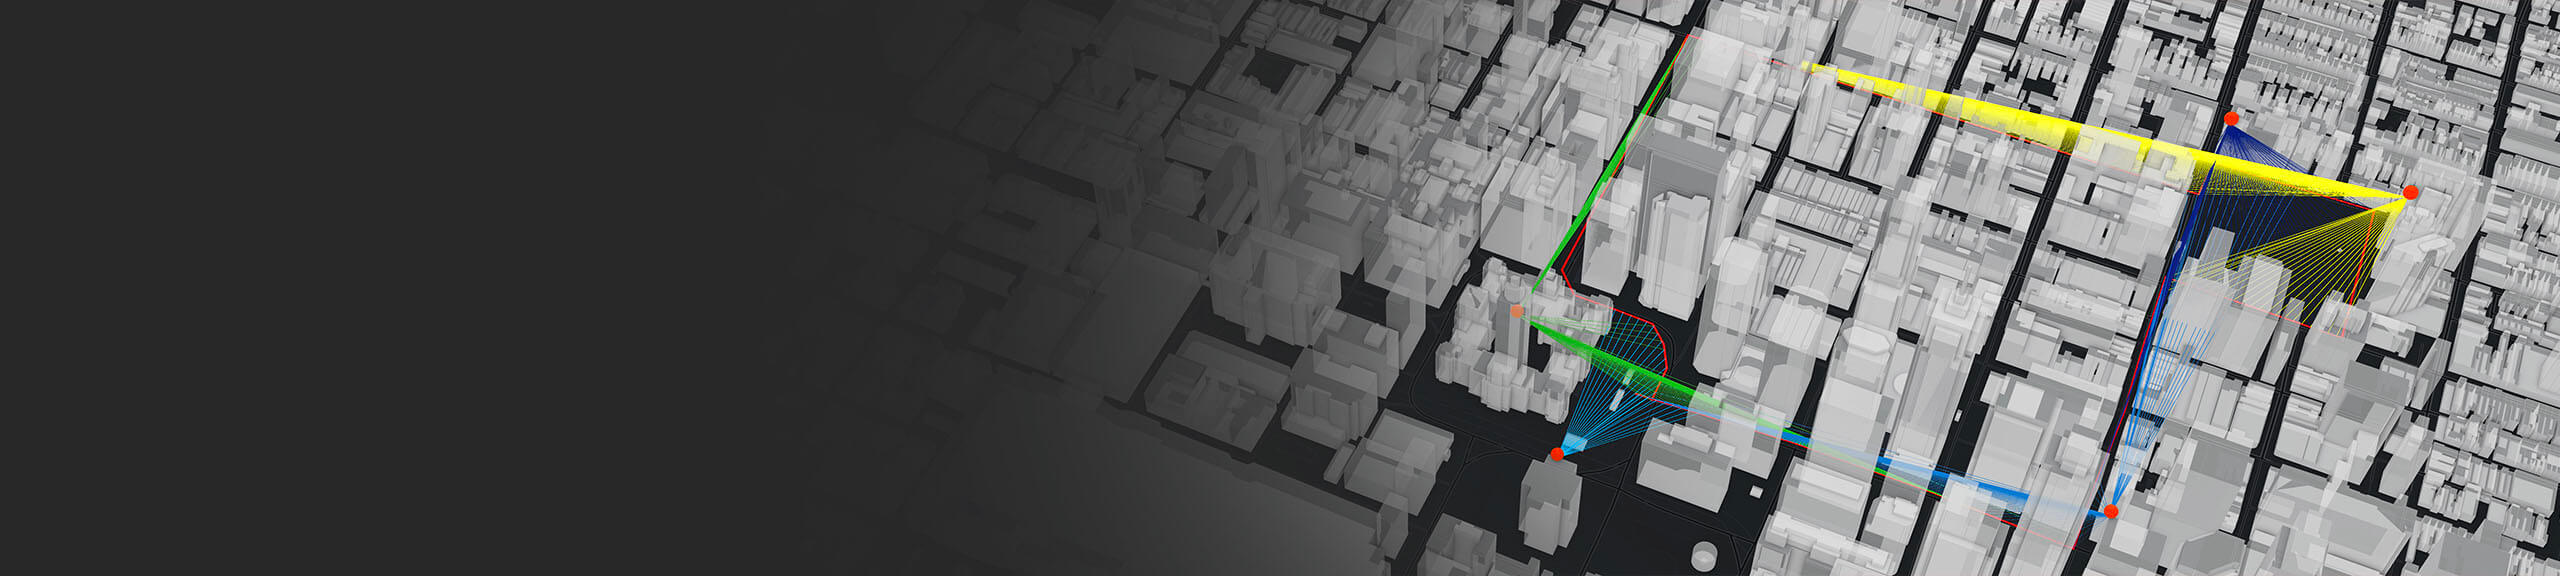 A digital model of dense city buildings with scattered red dots with lines connecting them